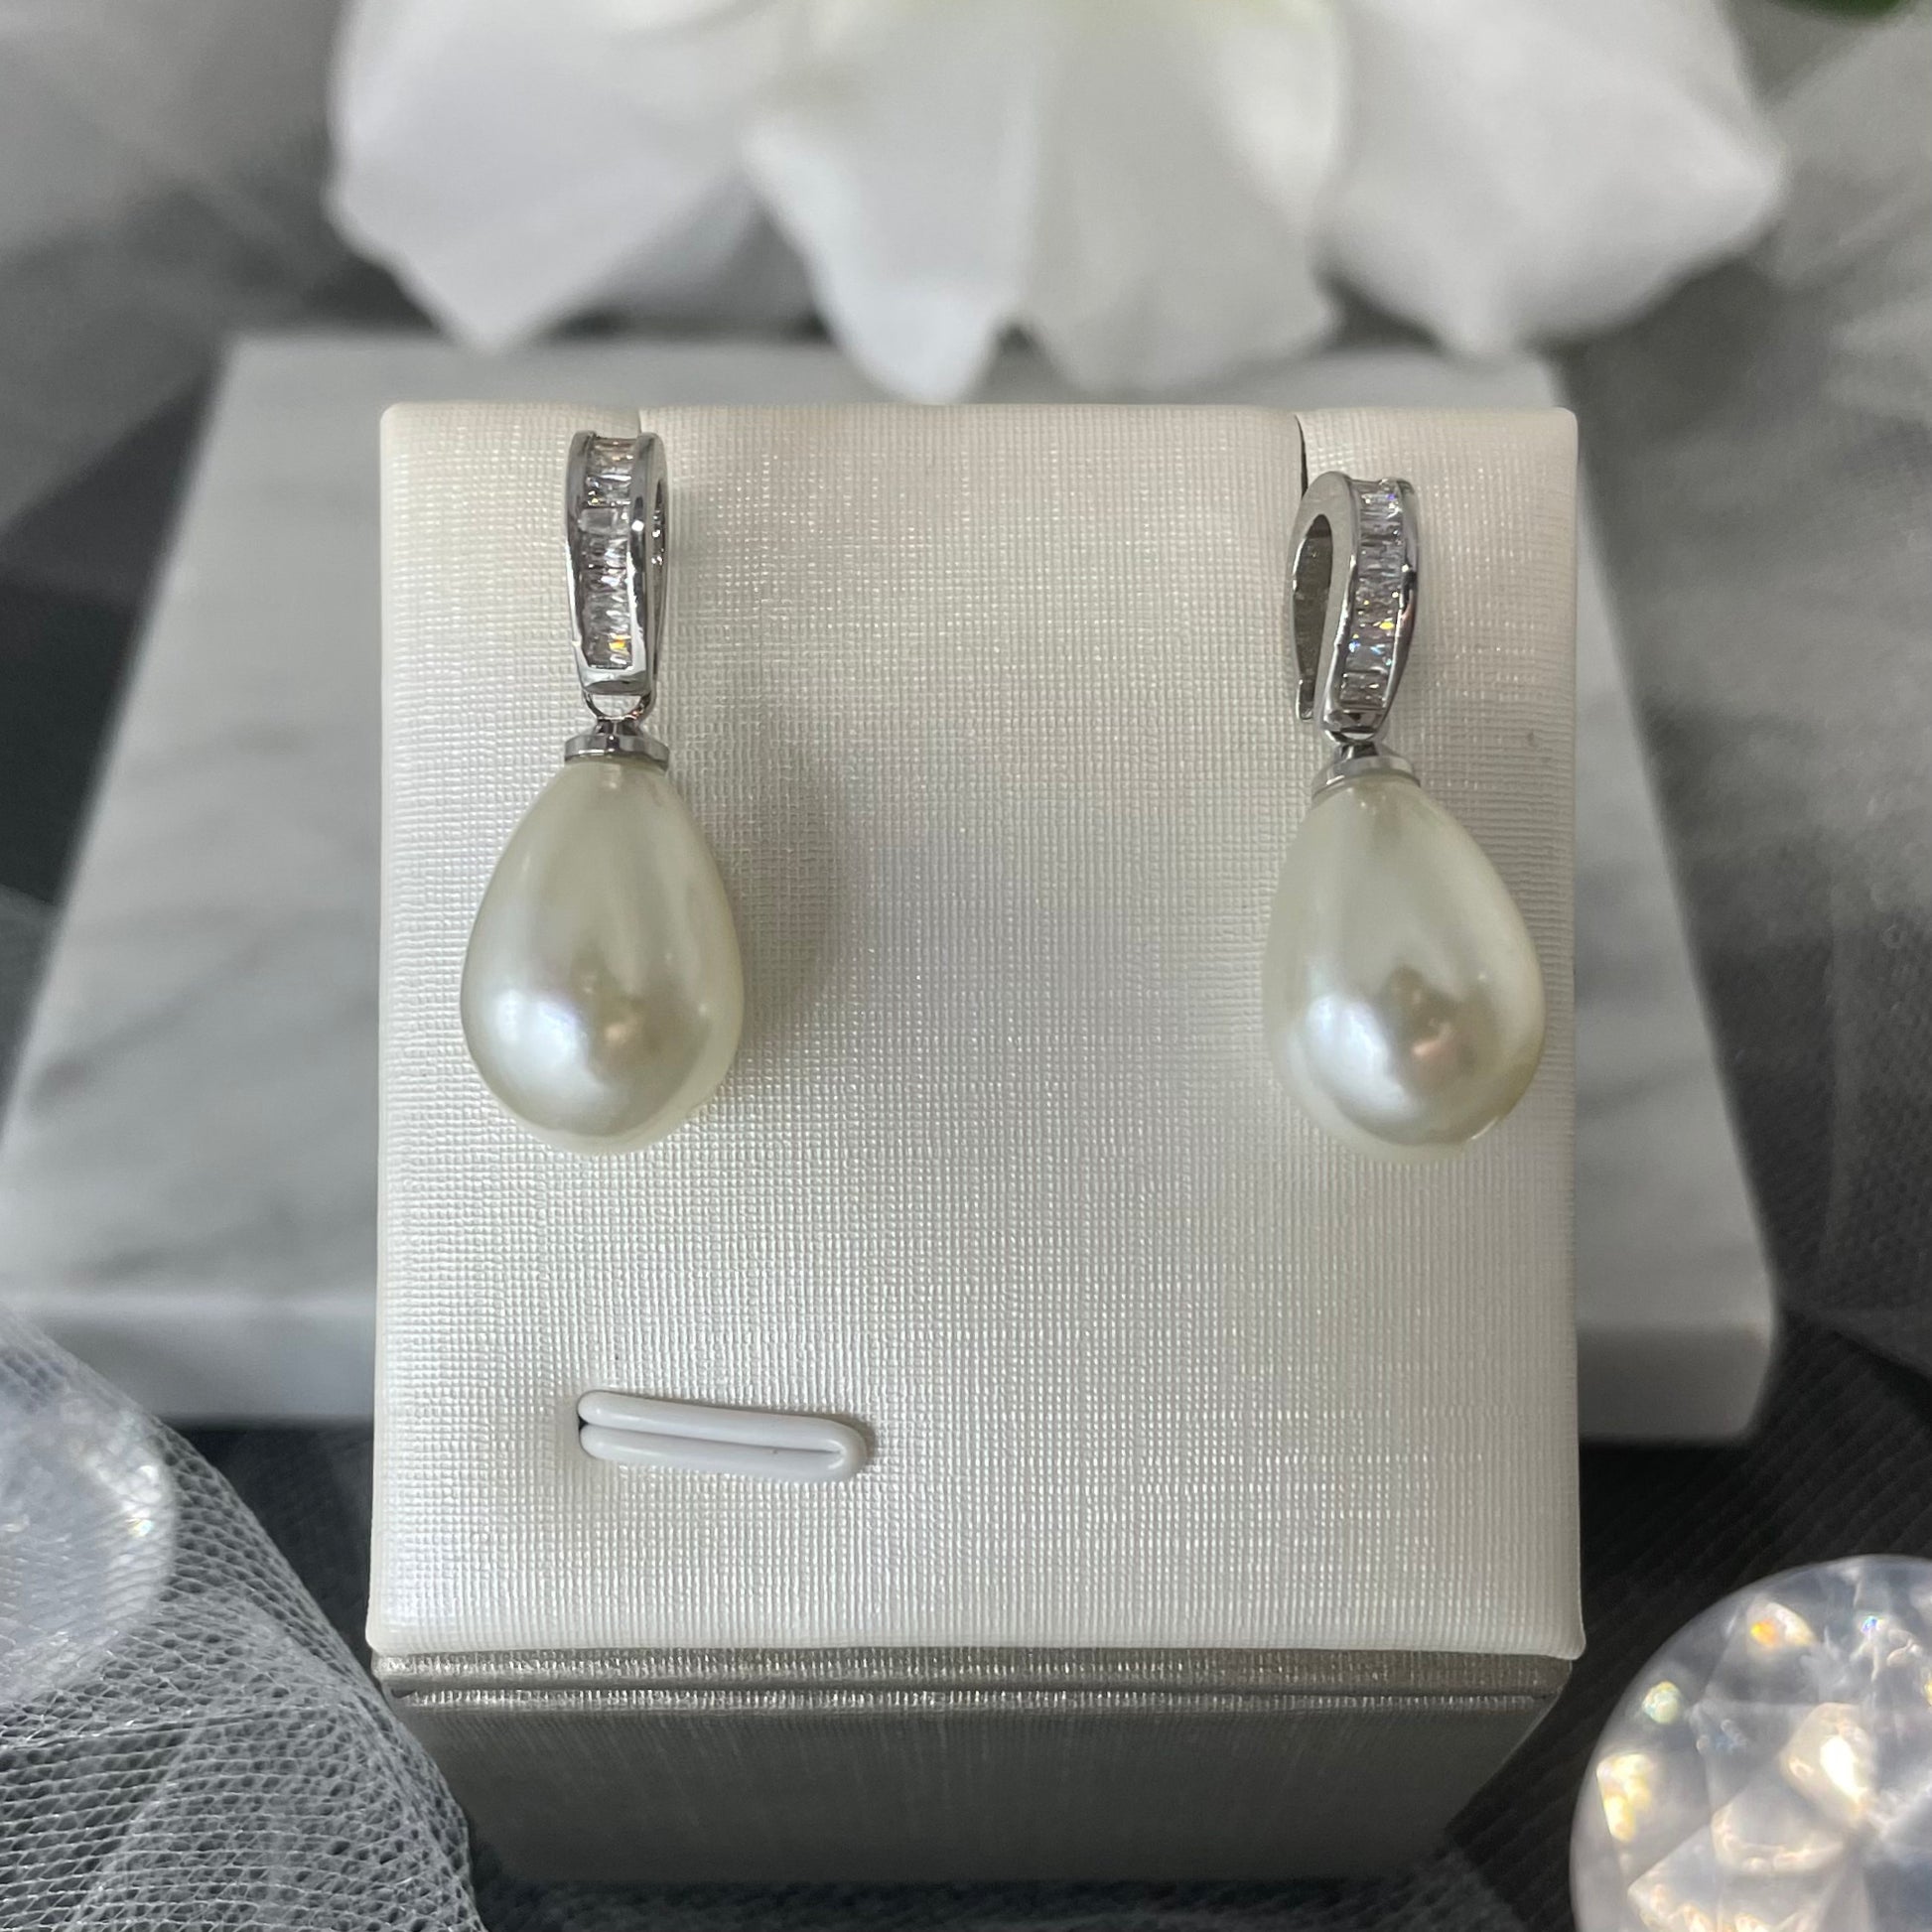 Madeline Bridal Earrings with Cushion-Cut Crystal Hoop and Pearl Drop in Silver - Divine Bridal